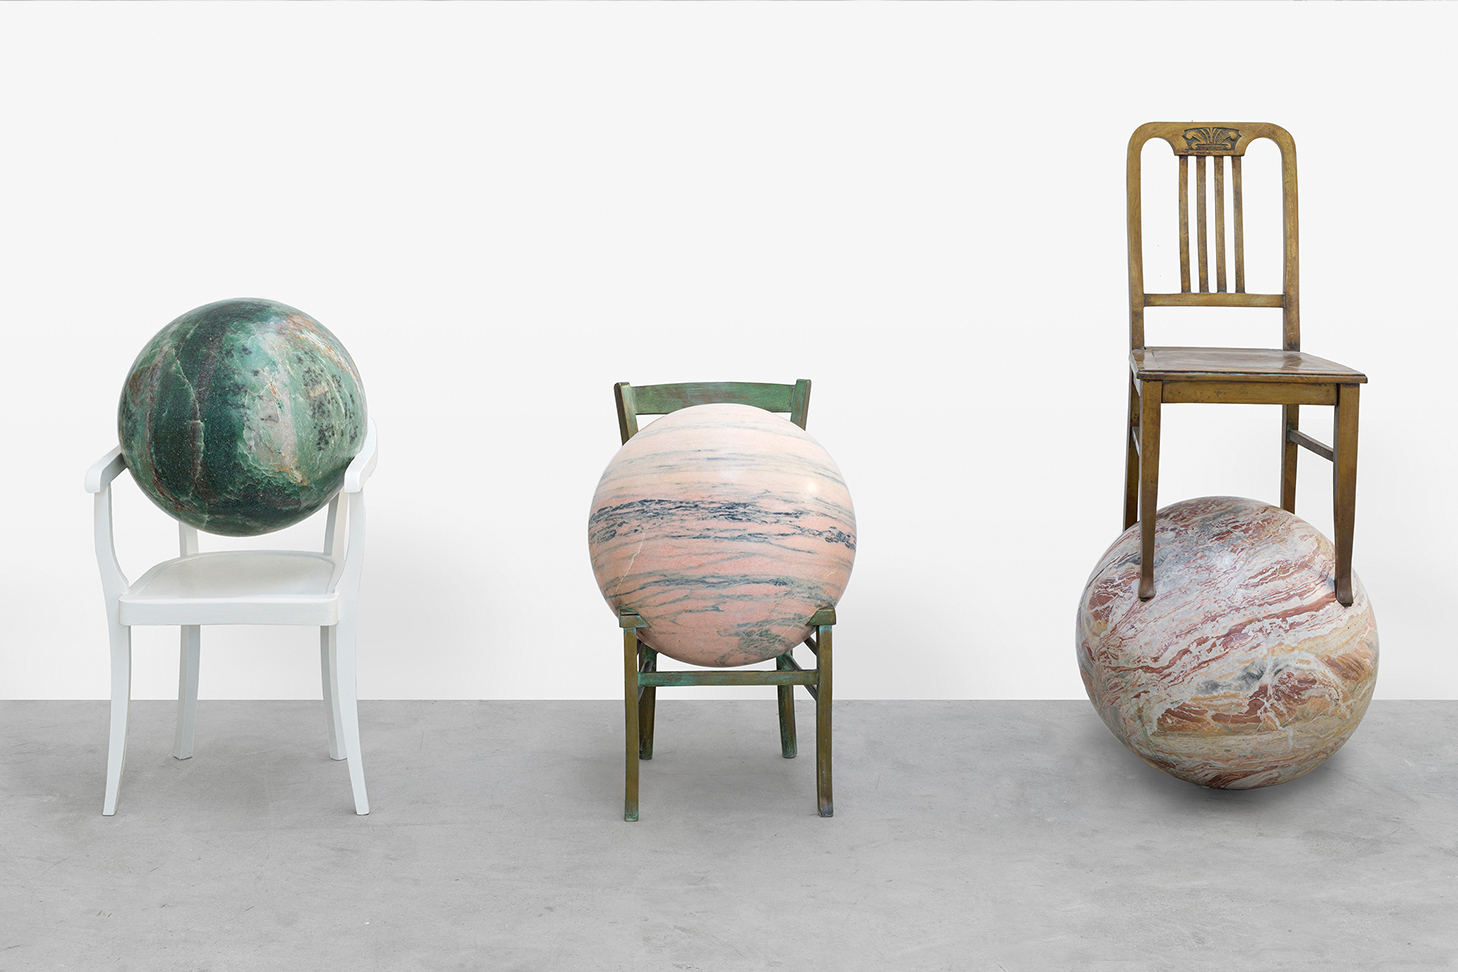 planets interacting with chairs in front of a white wall